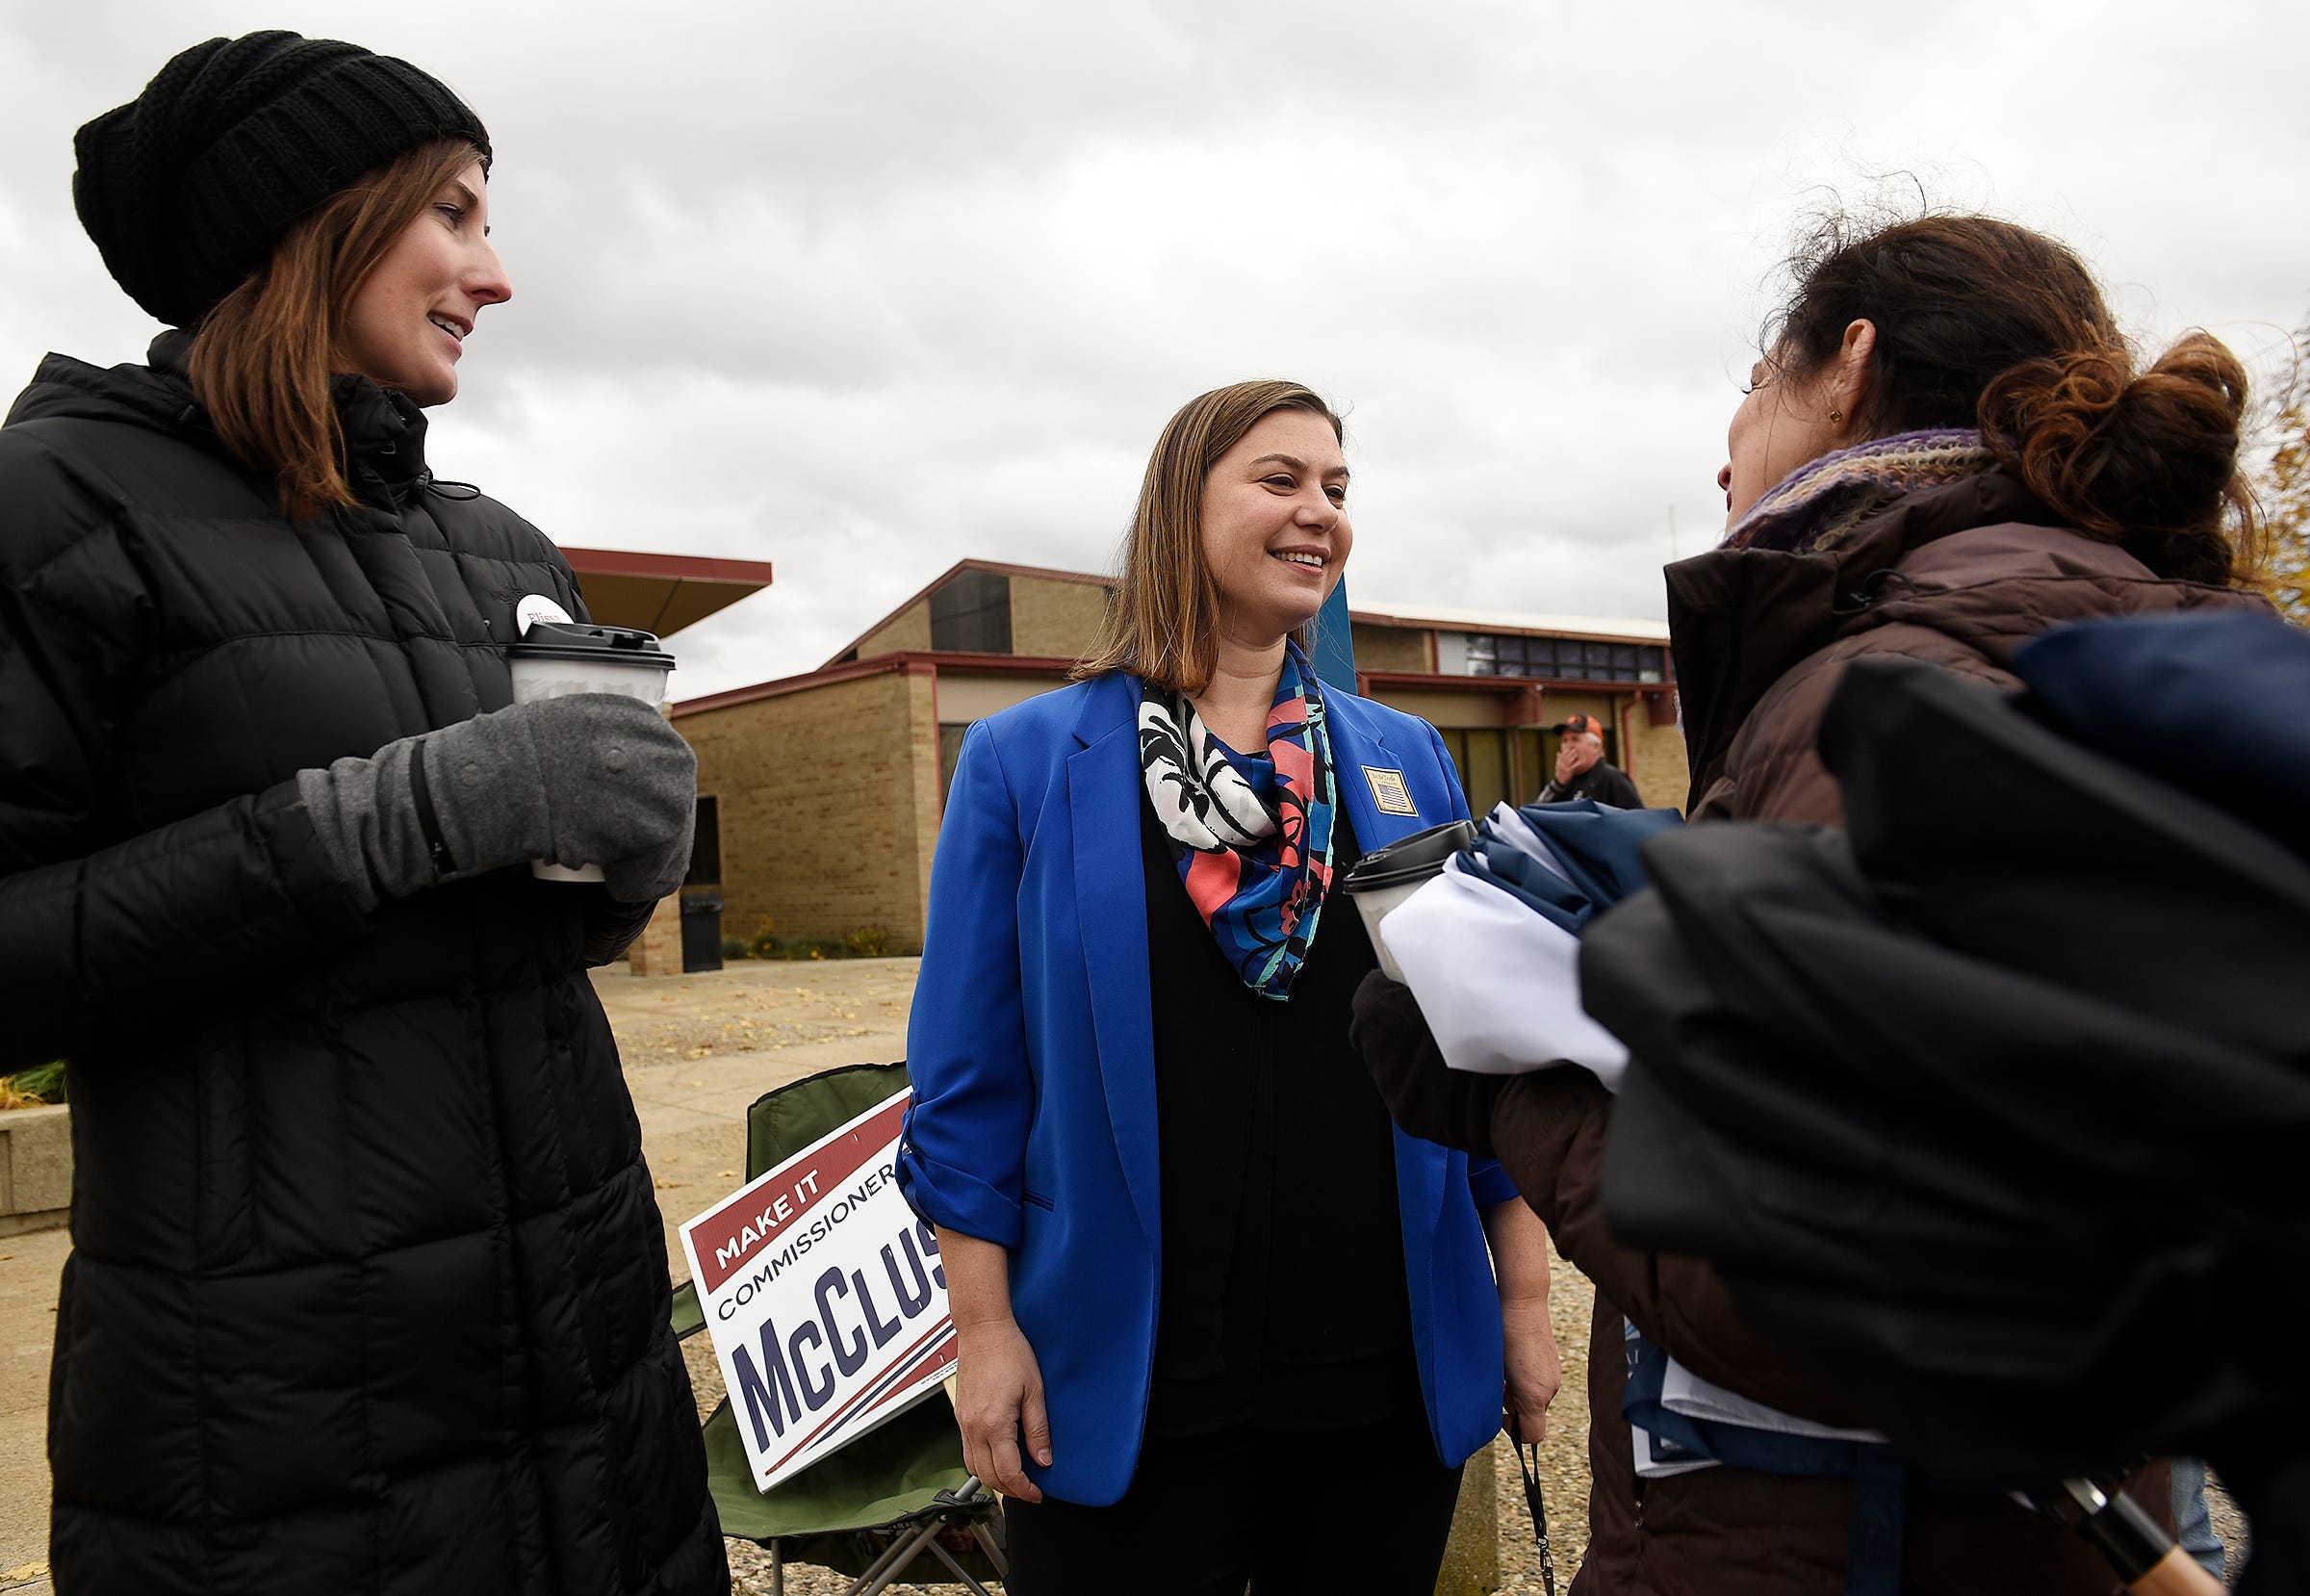 Elissa Slotkin, Democratic candidate for U.S. House of Representatives, talks to supporters Leigh Fullenkamp, left, 35, of Columbus, Ohio, and sister-in-law Amy Gottesman, 41, of St. Louis after casting her ballot at the Karl Richter Community Center in Holly on Nov., 6, 2018.